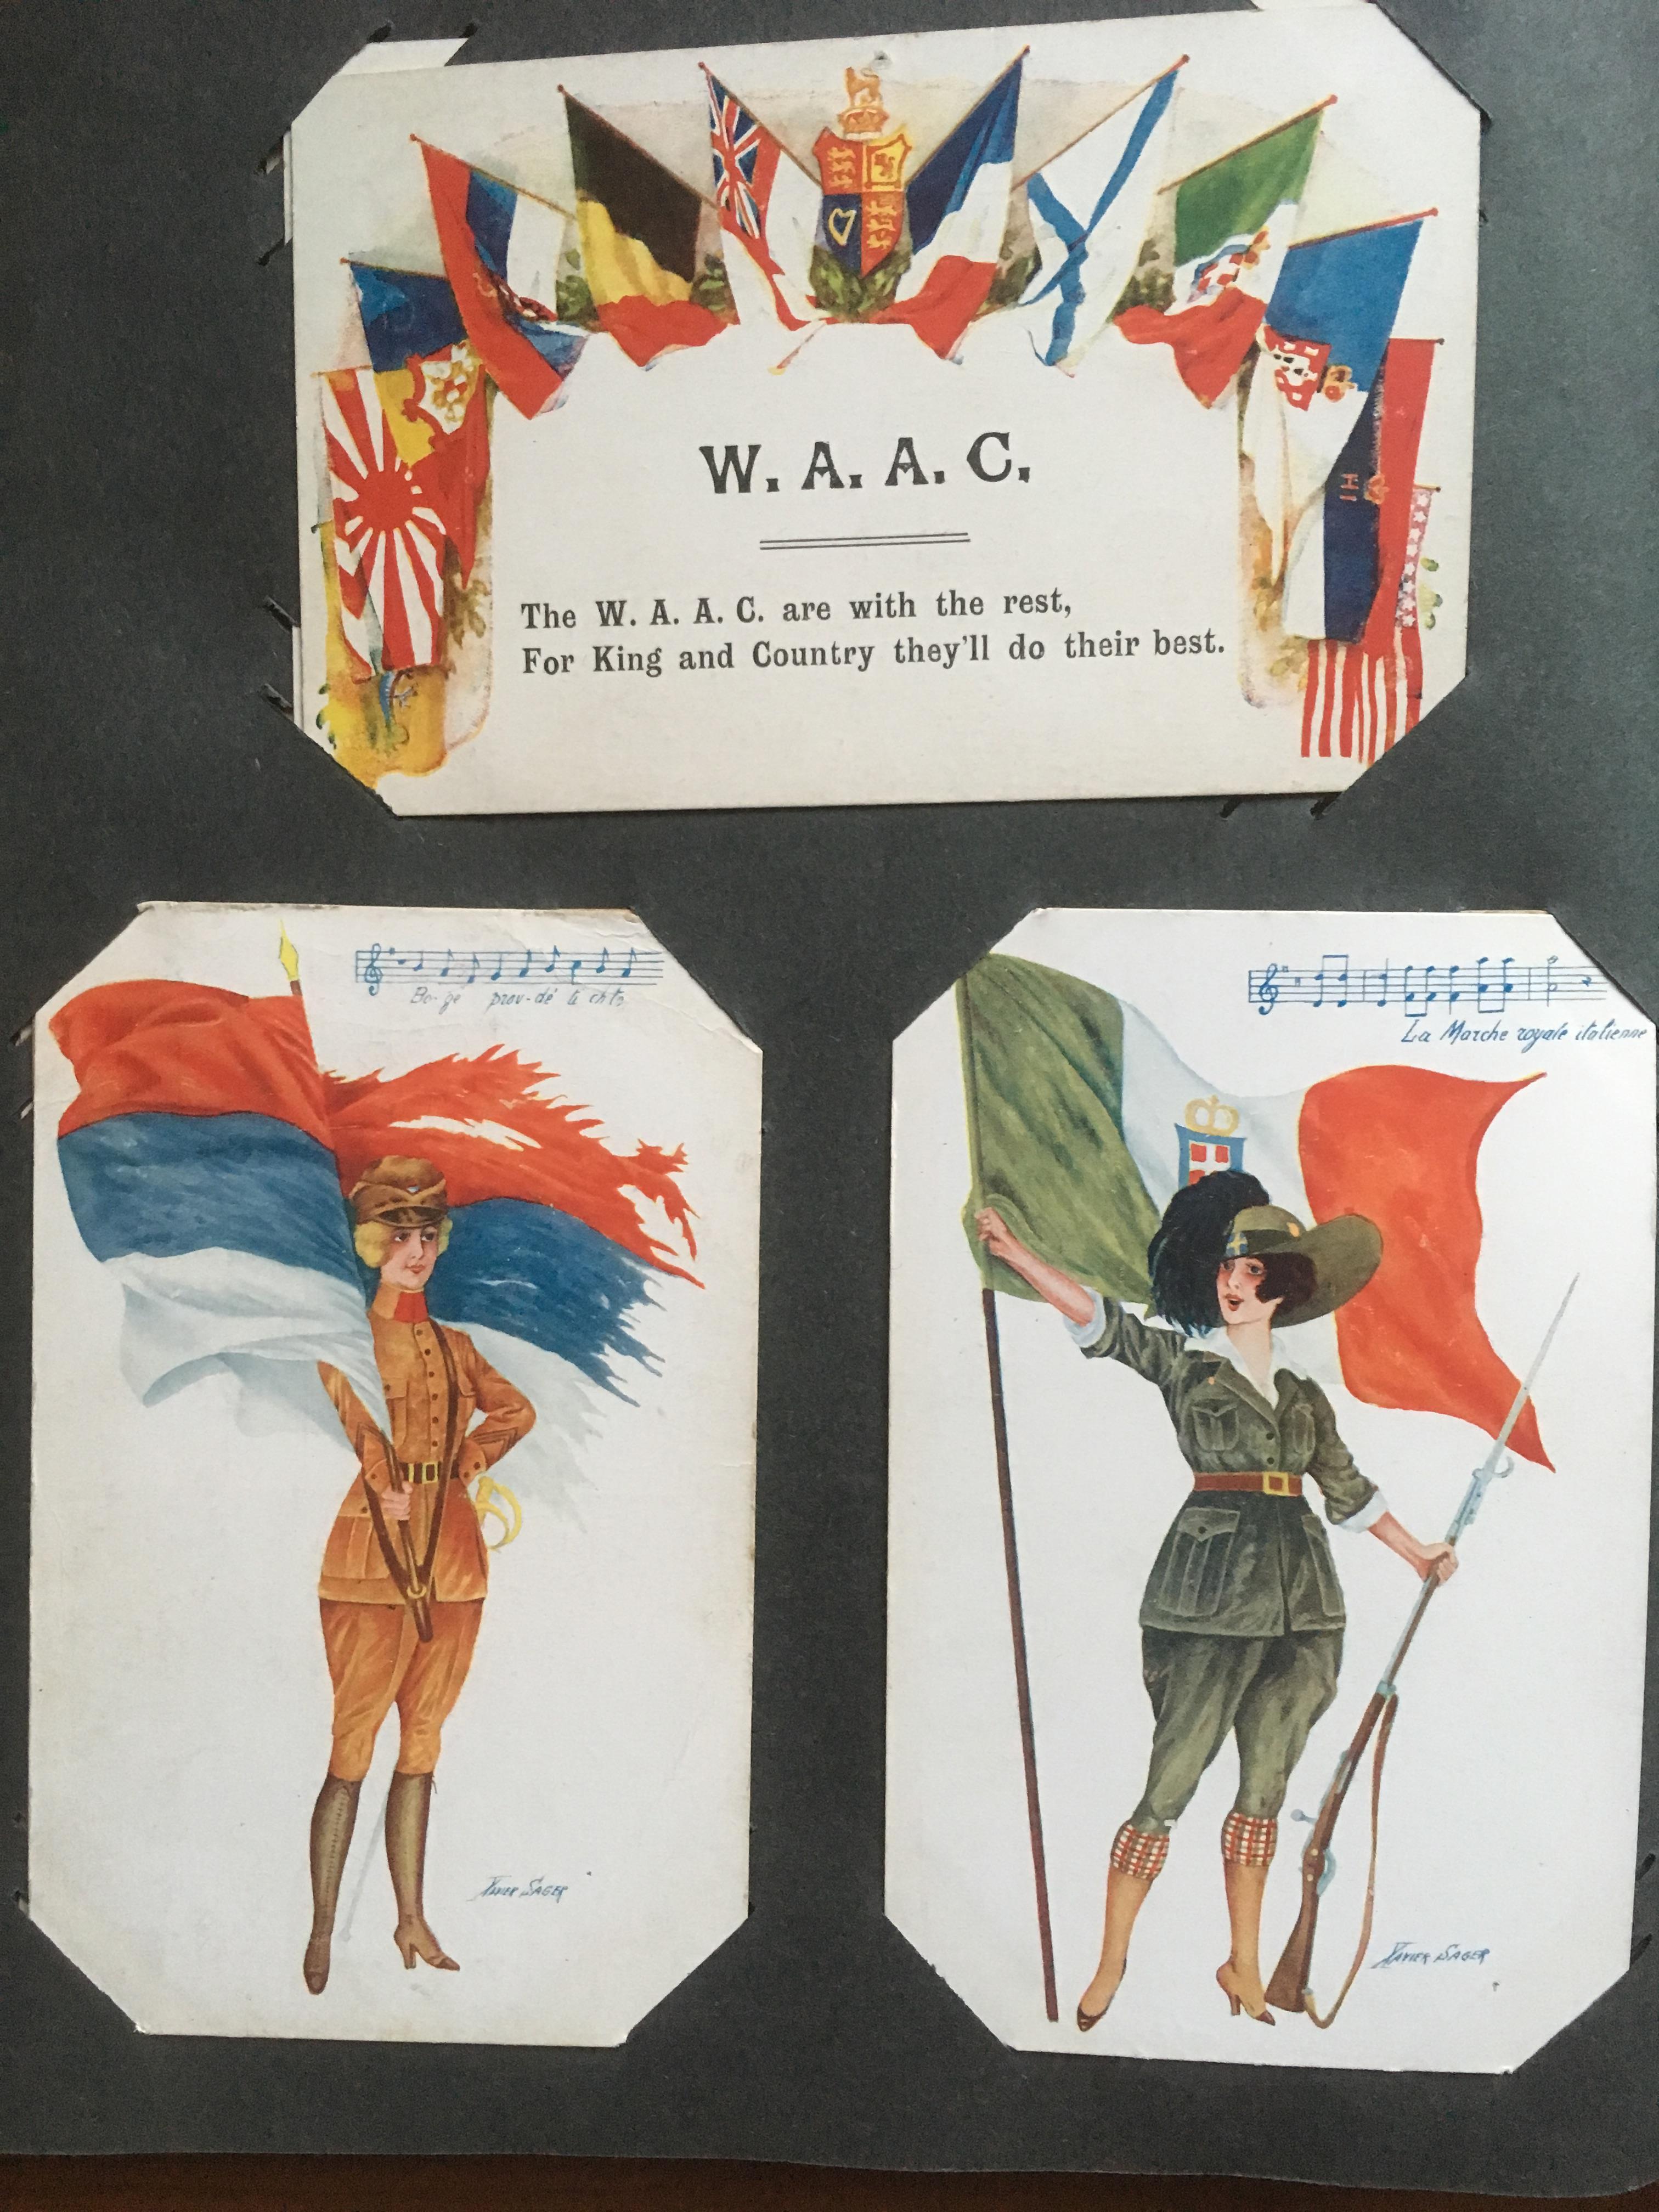 CORNER SLOT ALBUM OF MILITARY POSTCARDS, ARTISTS WITH HARRY PAYNE, MUCH WW1 WITH COMIC, SENTIMENT, - Image 7 of 19